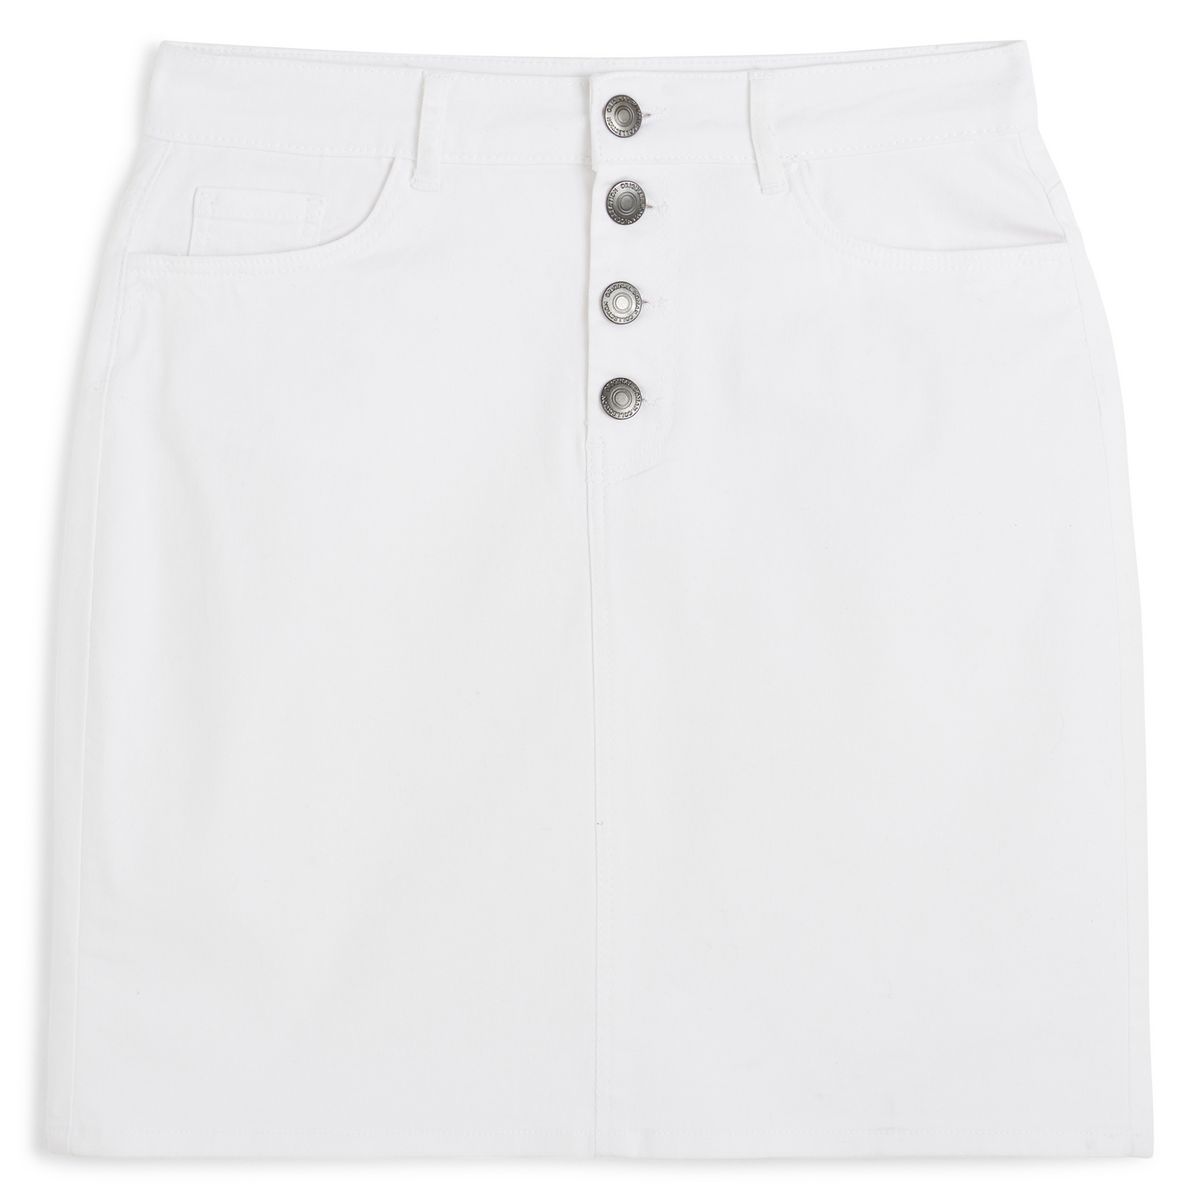 INEXTENSO Jupe blanche femme